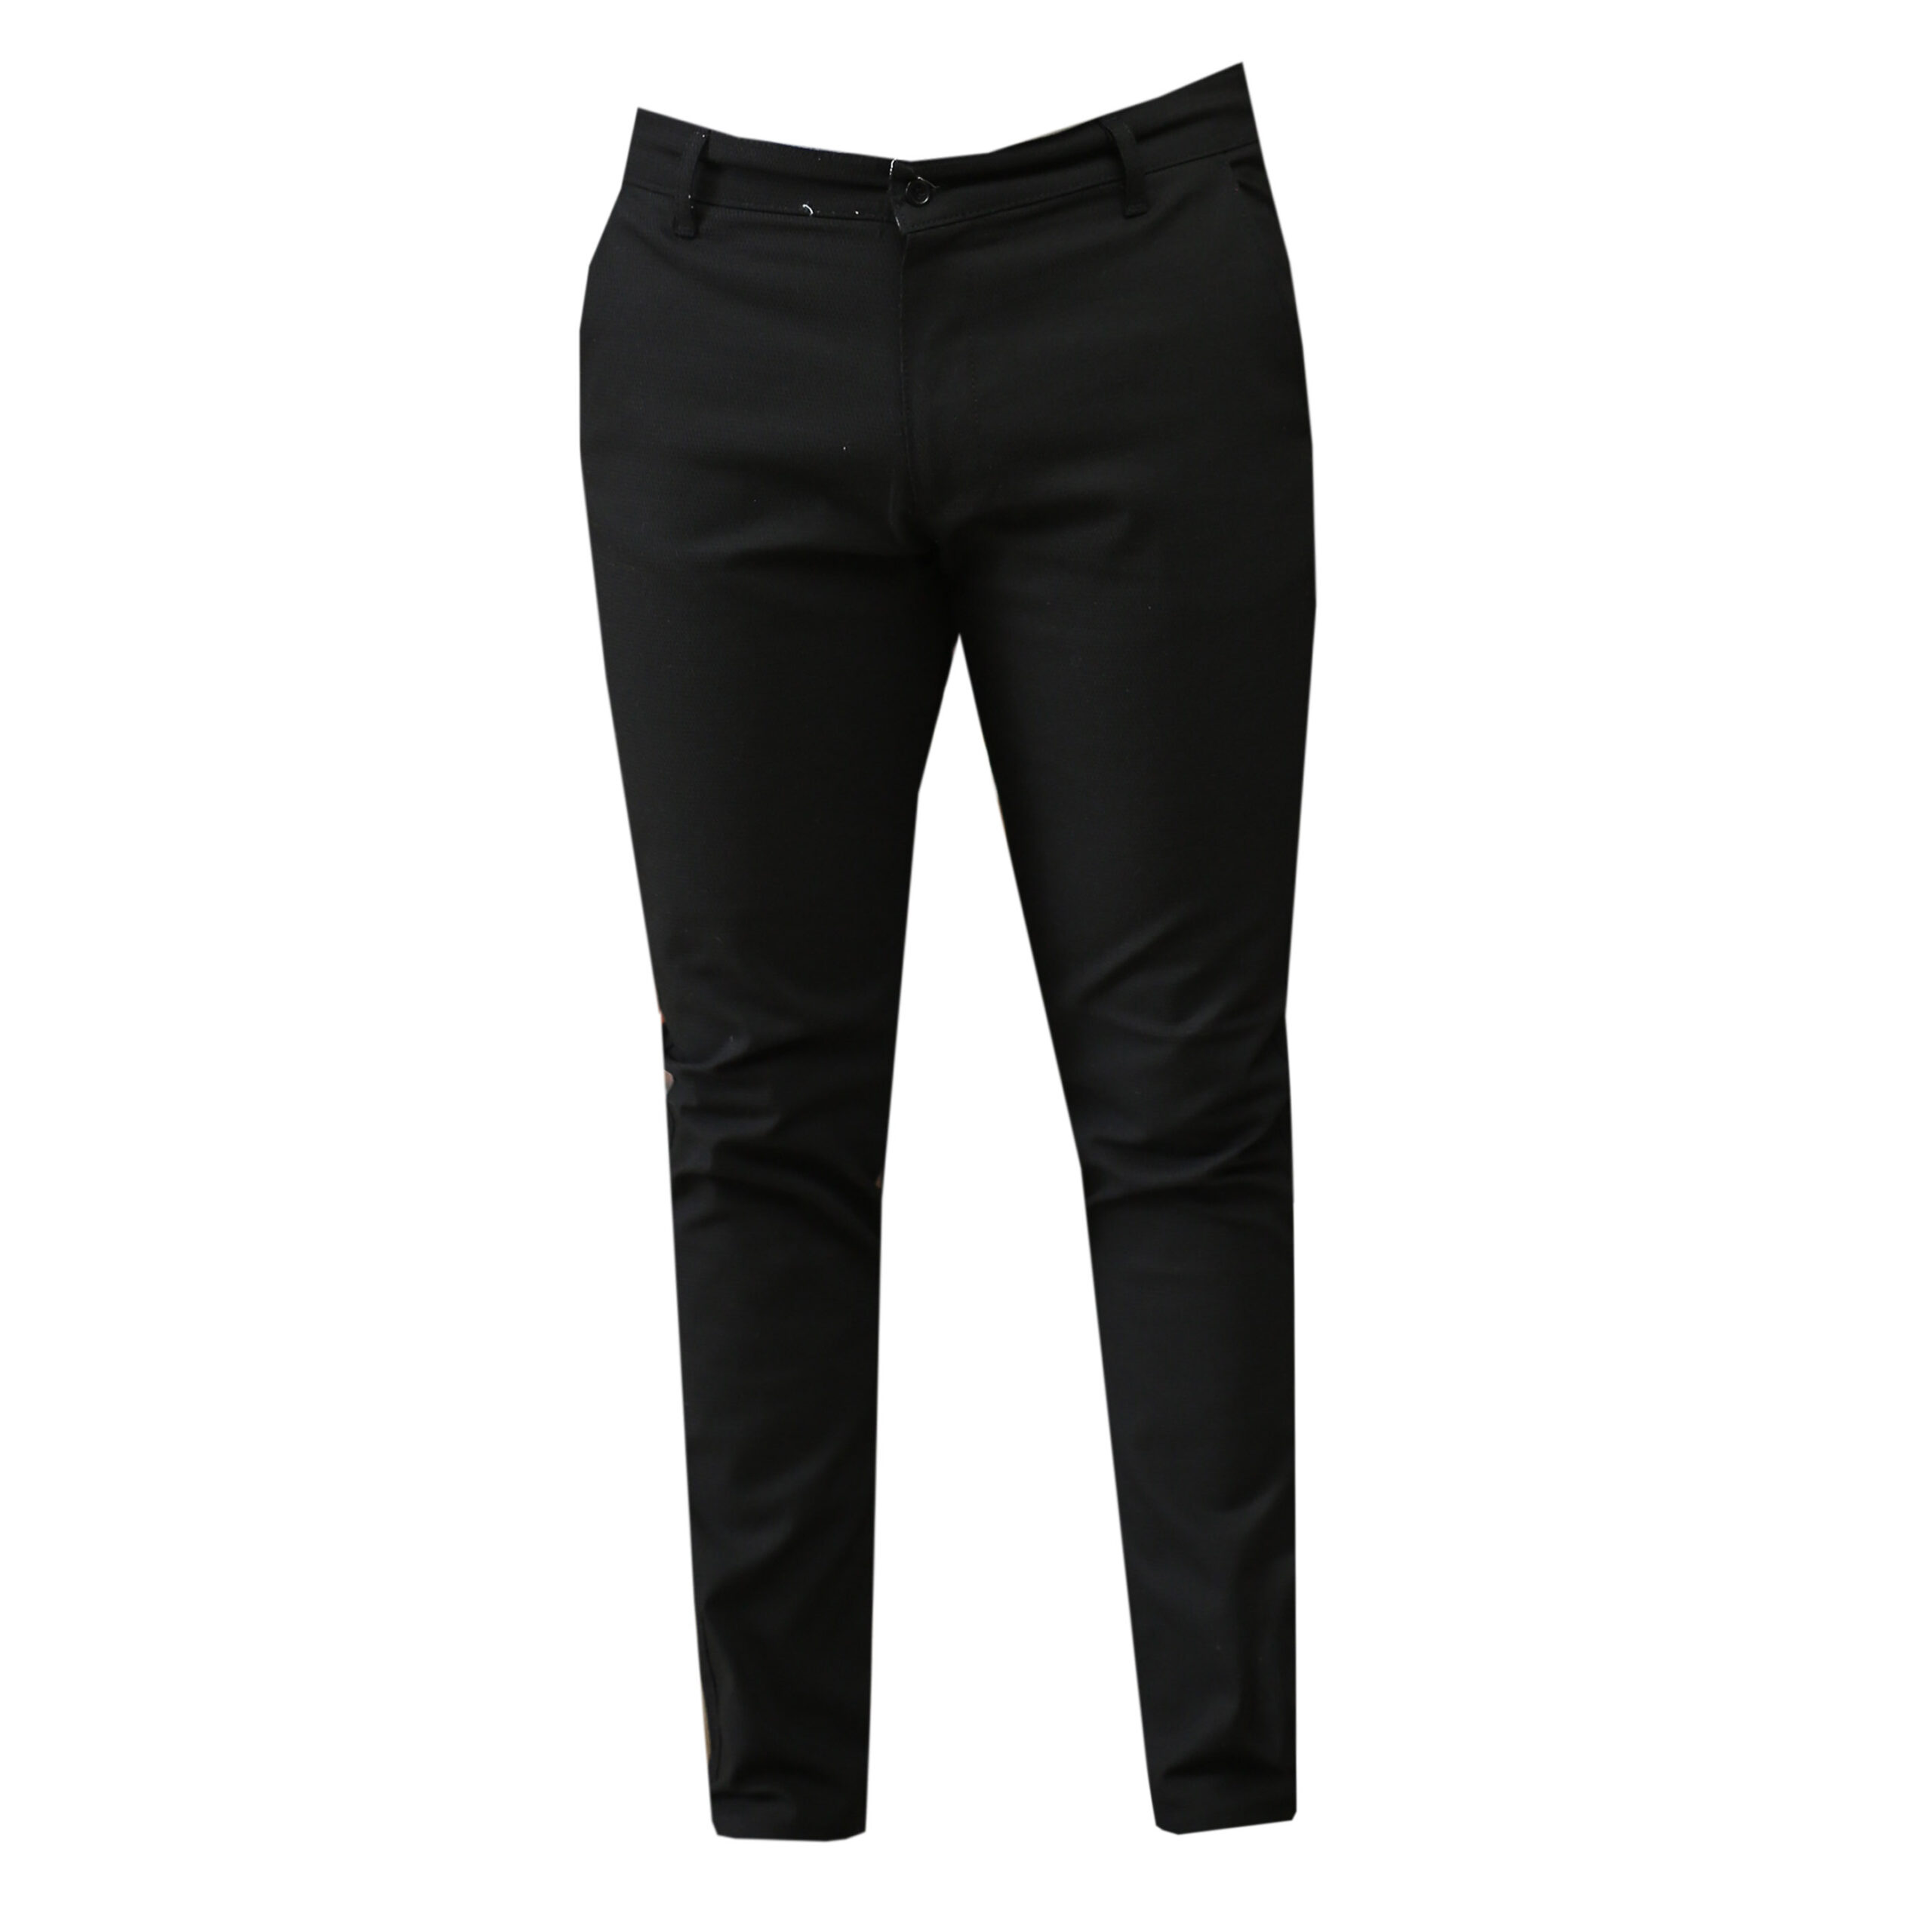 Black Chino Casual Pants for Men